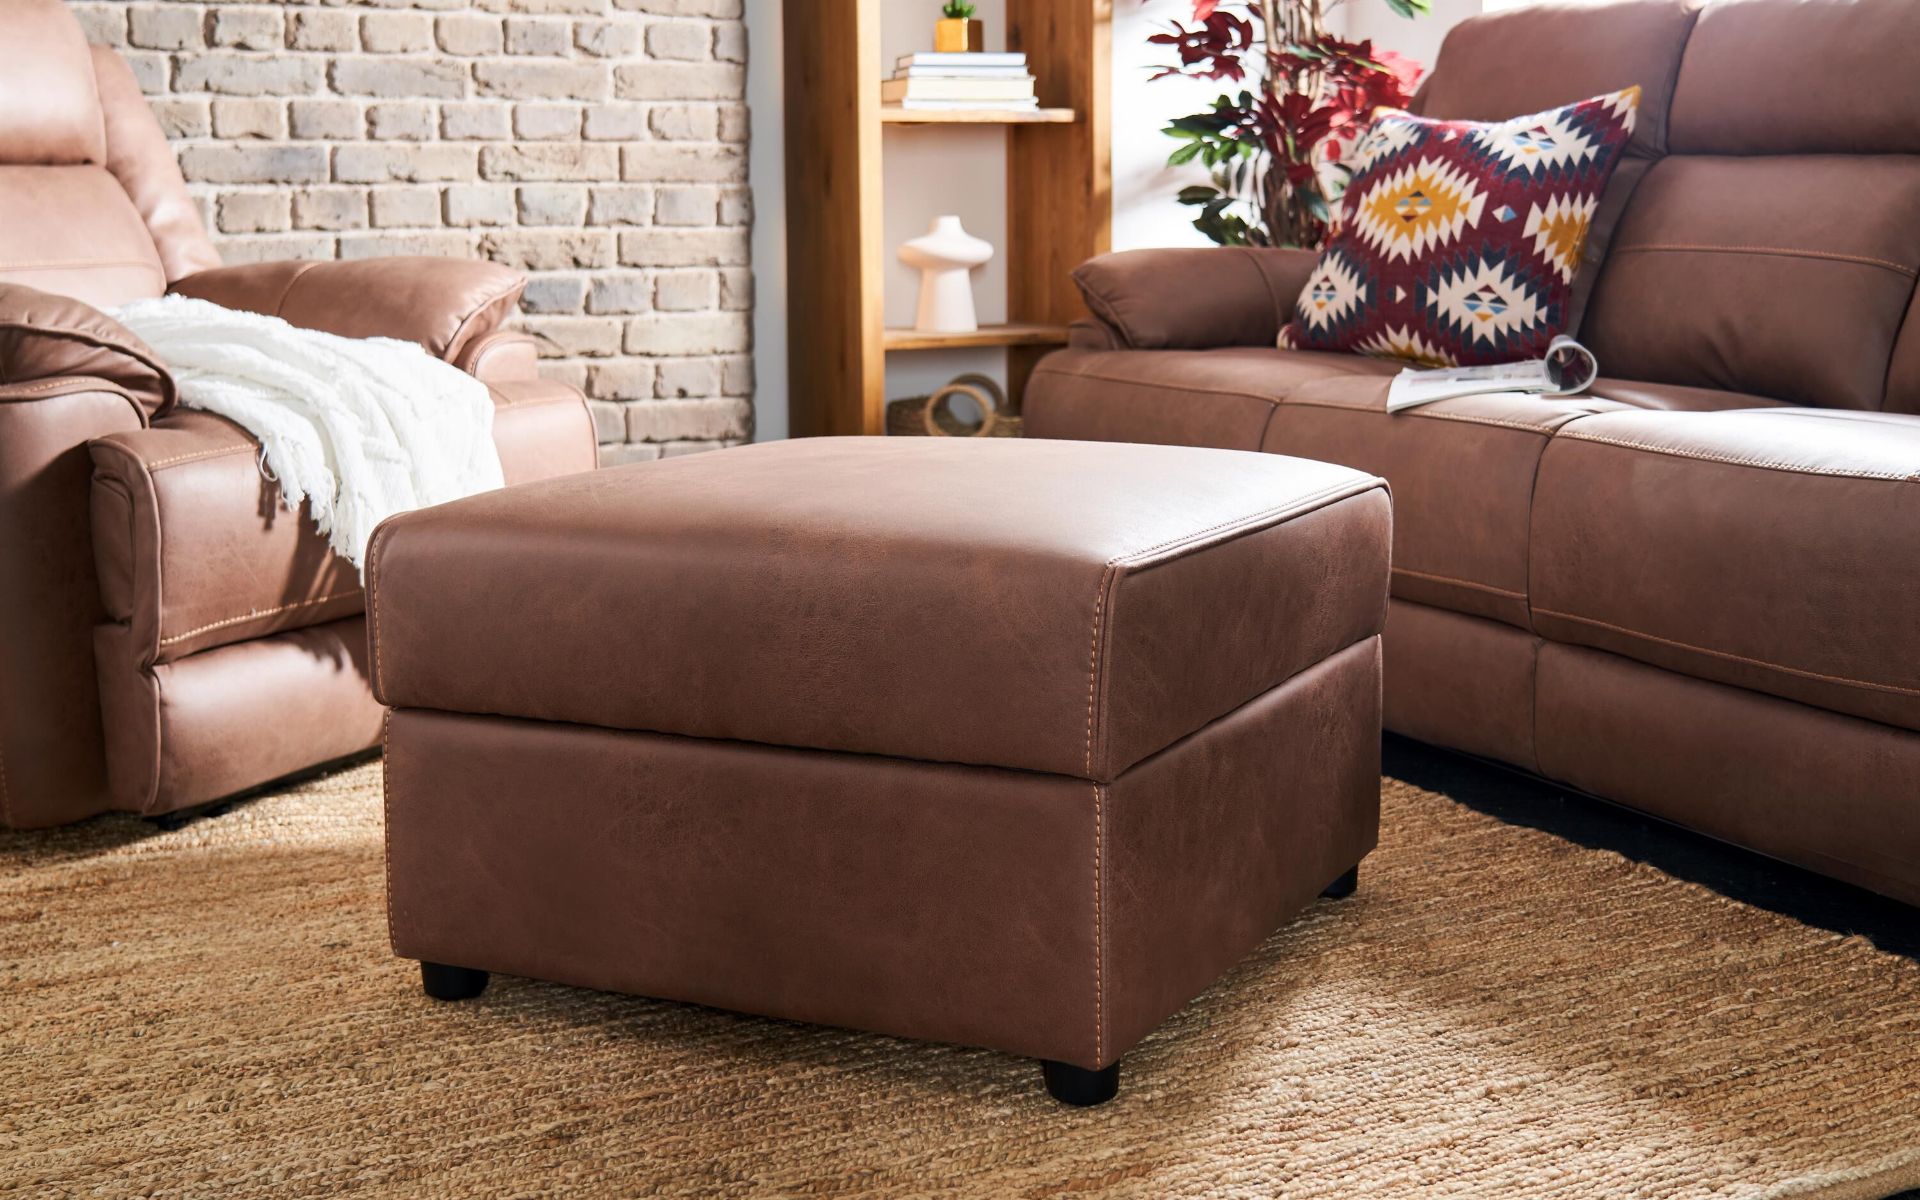 ScS Cassia Storage Footstool Tuscany Brown Self Pipe Self Stitch Black Plastic Feet RRP 559 About - Image 2 of 2